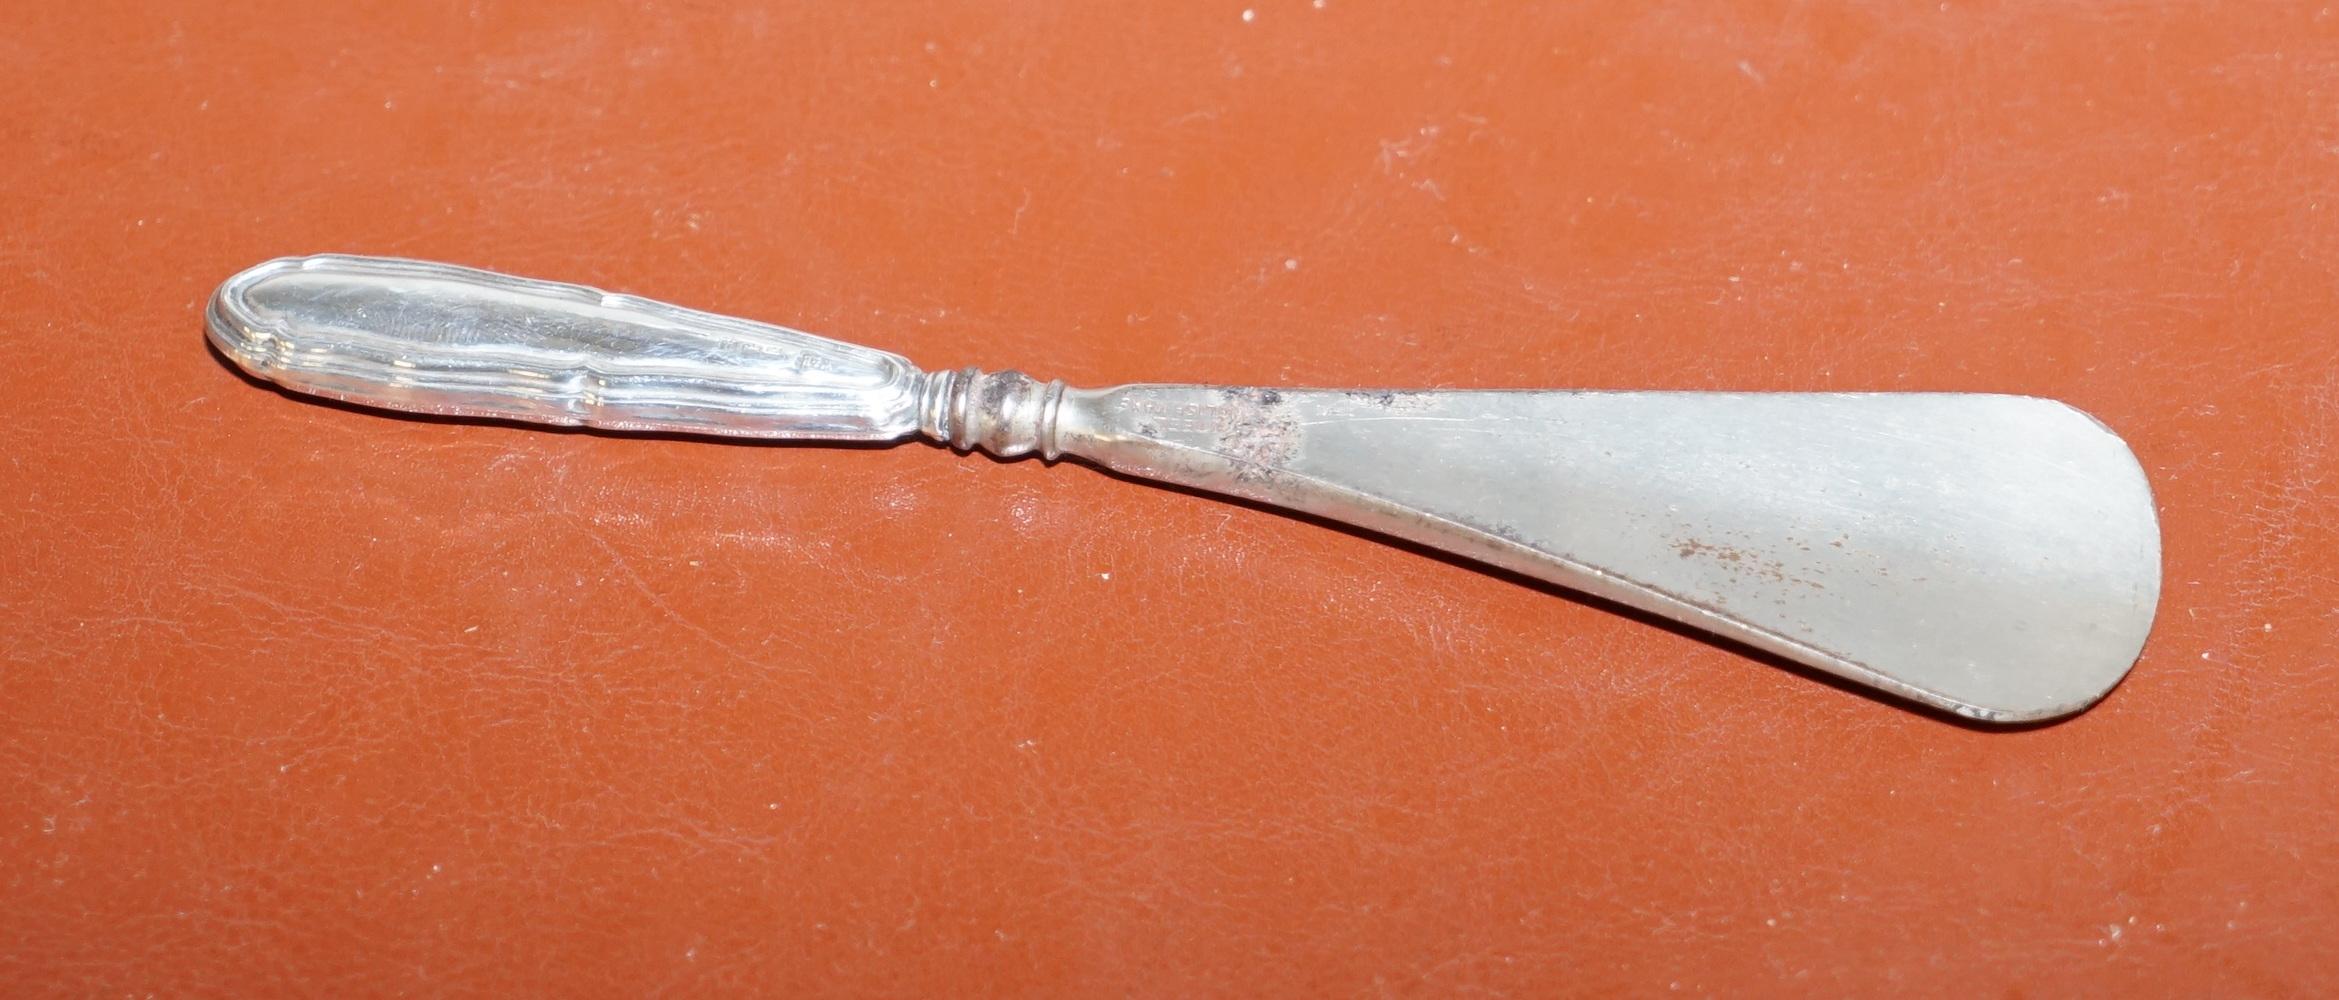 We are delighted to offer for sale this lovely small 1919 Birmingham made sterling silver handled shoe horn

A very good looking well made and decorative piece, the handle is fully hallmarked with a makers mark of W&H, the ships anchor for